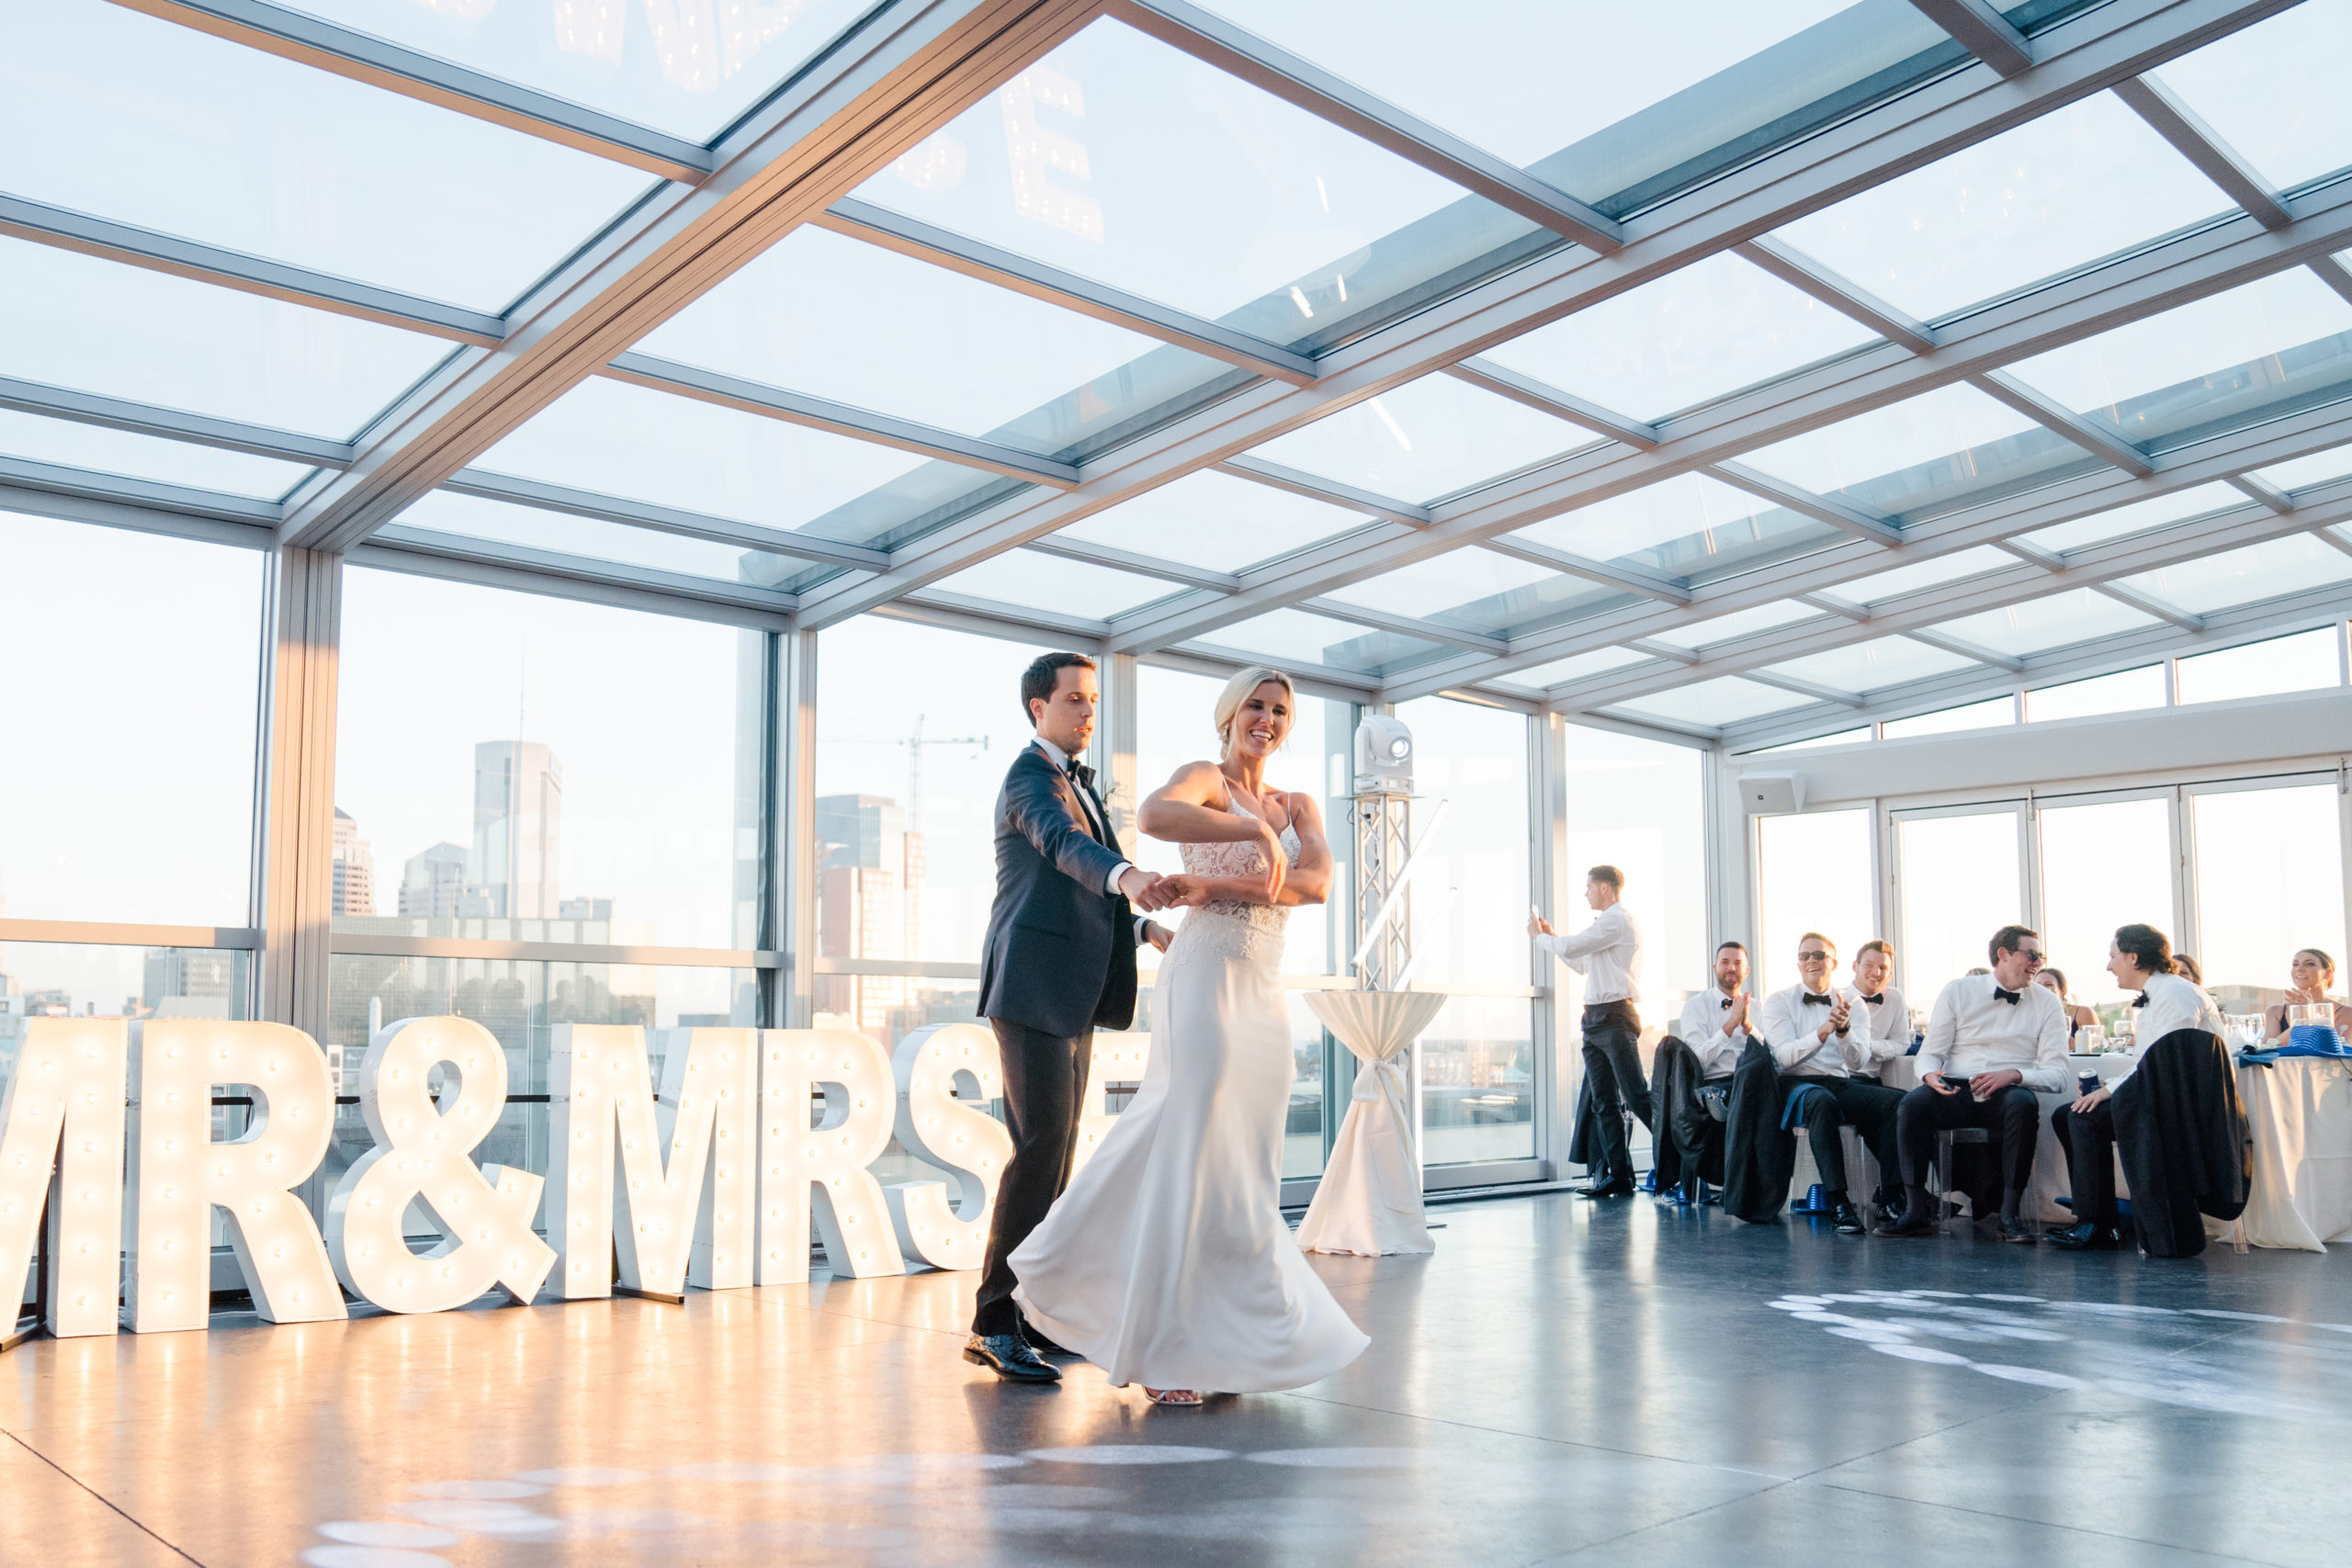 Bride and groom dancing at Revery a columbus, ohio wedding venue with a glass roof top taken by ashleigh grzybowski an ohio wedding photographer